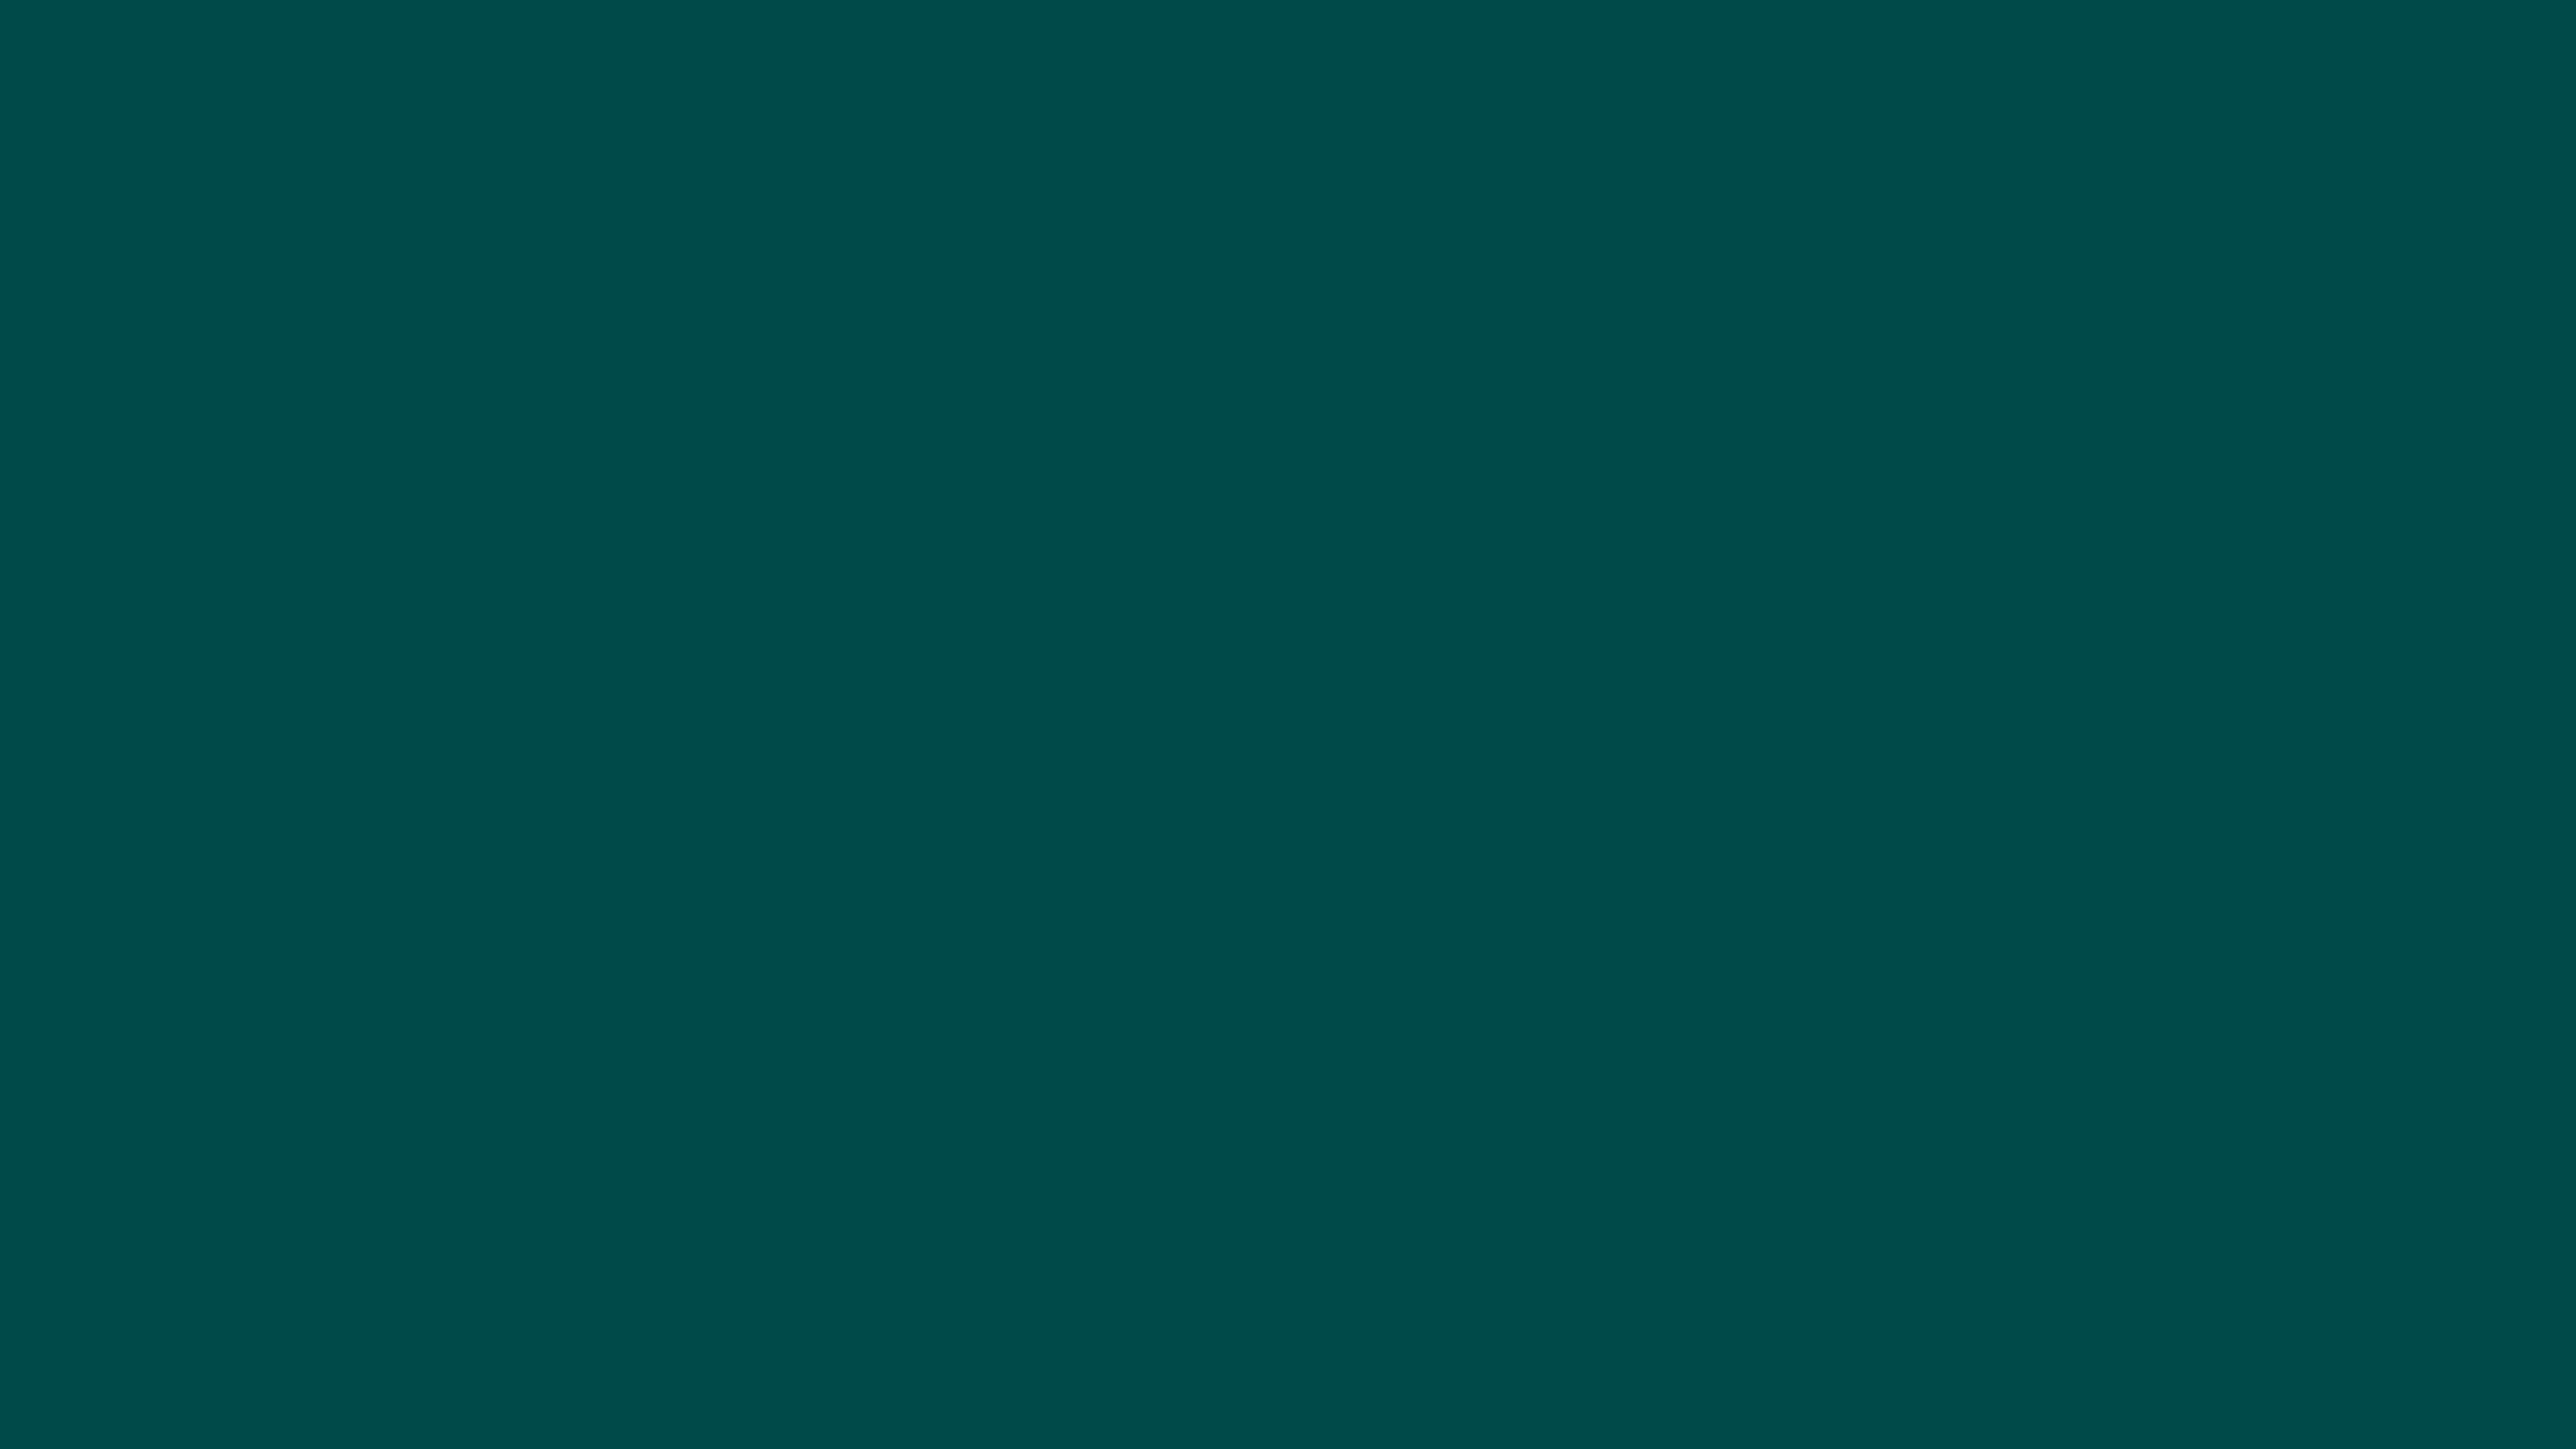 7680x4320 Deep Jungle Green Solid Color Background